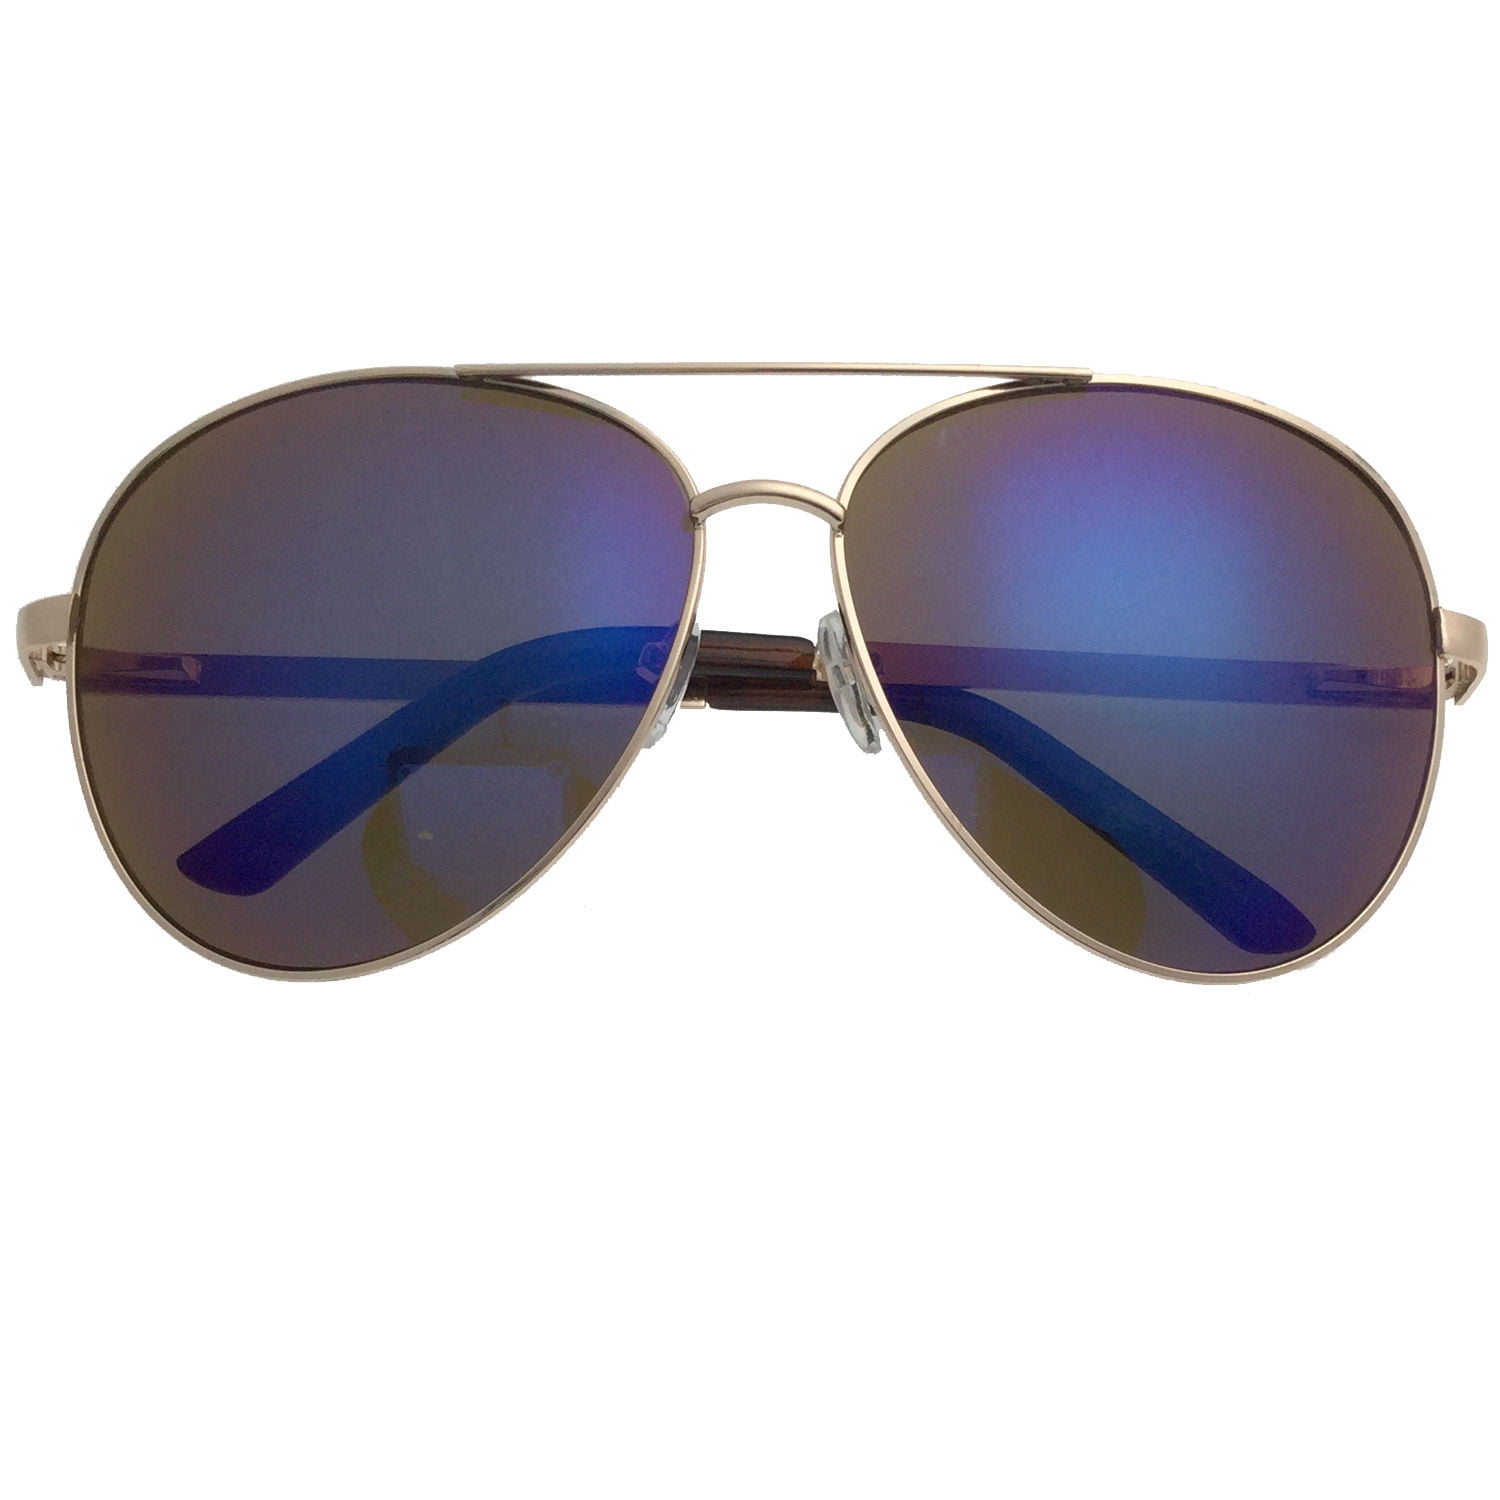 UV400 Sports Wrap Round Yellow Sunglasses For Women And Men Yellow And  Brown Lenses With Box From Jenlsky, $47.65 | DHgate.Com